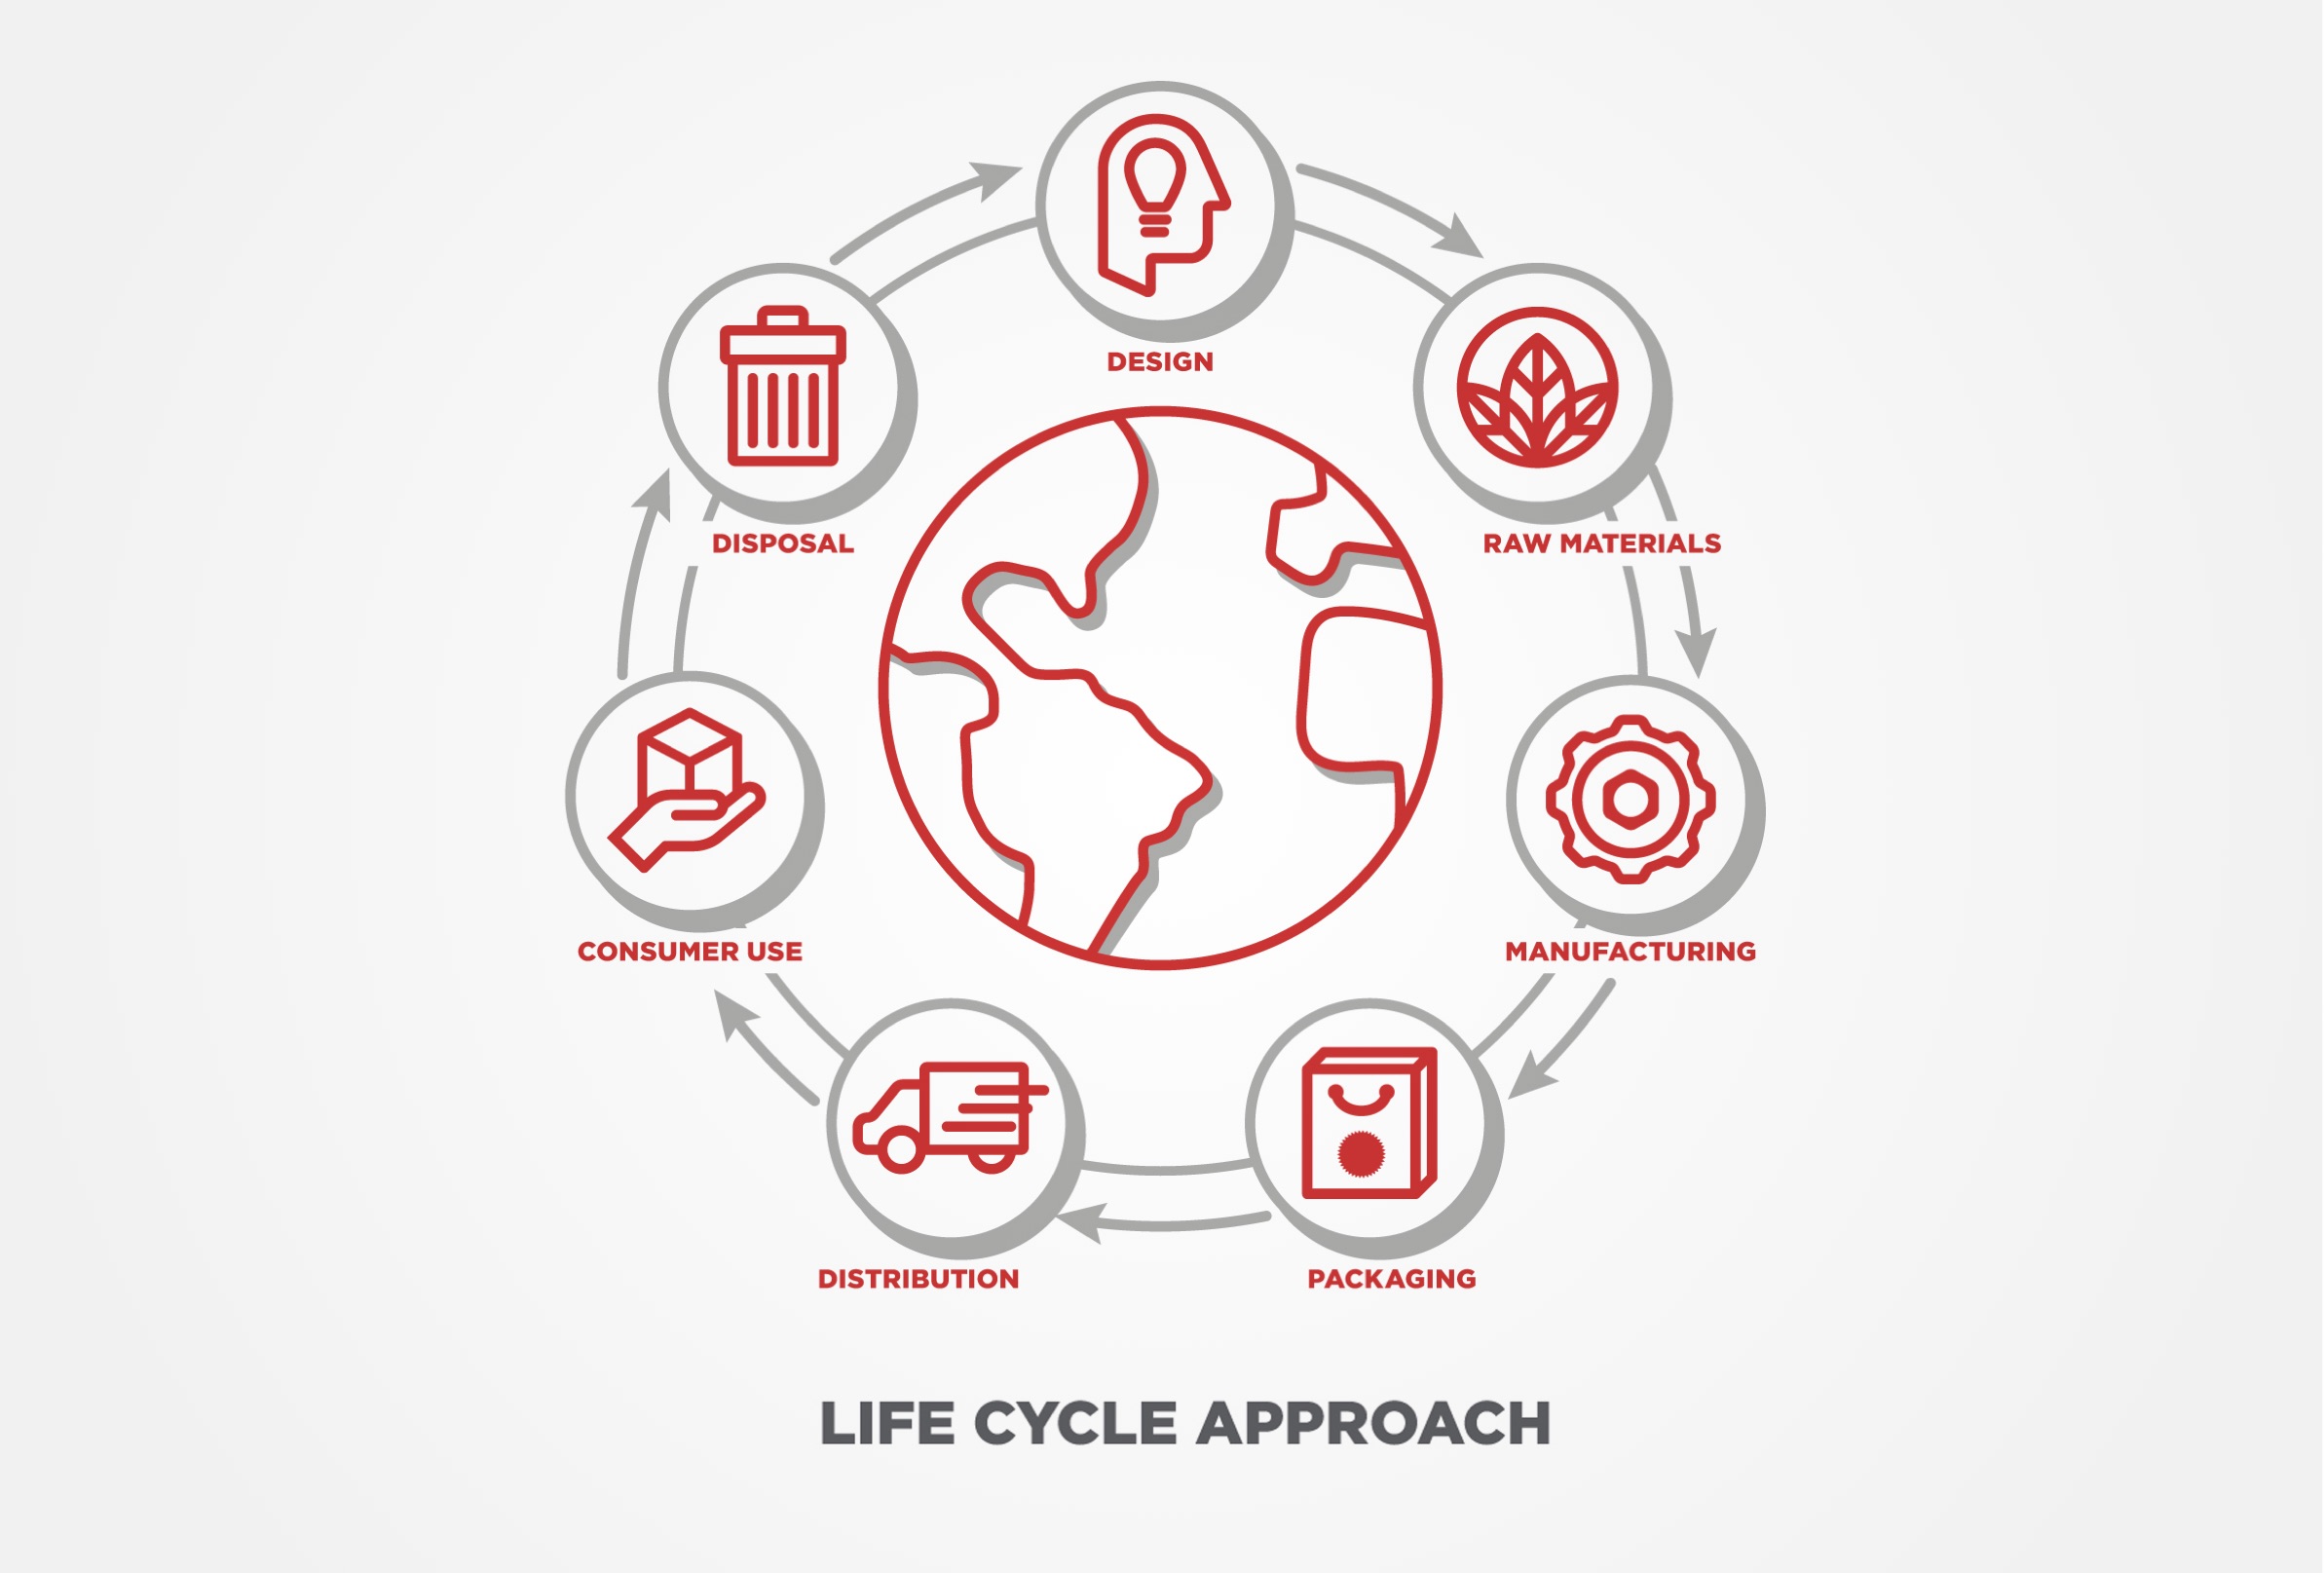 Life Cycle Approach graphic